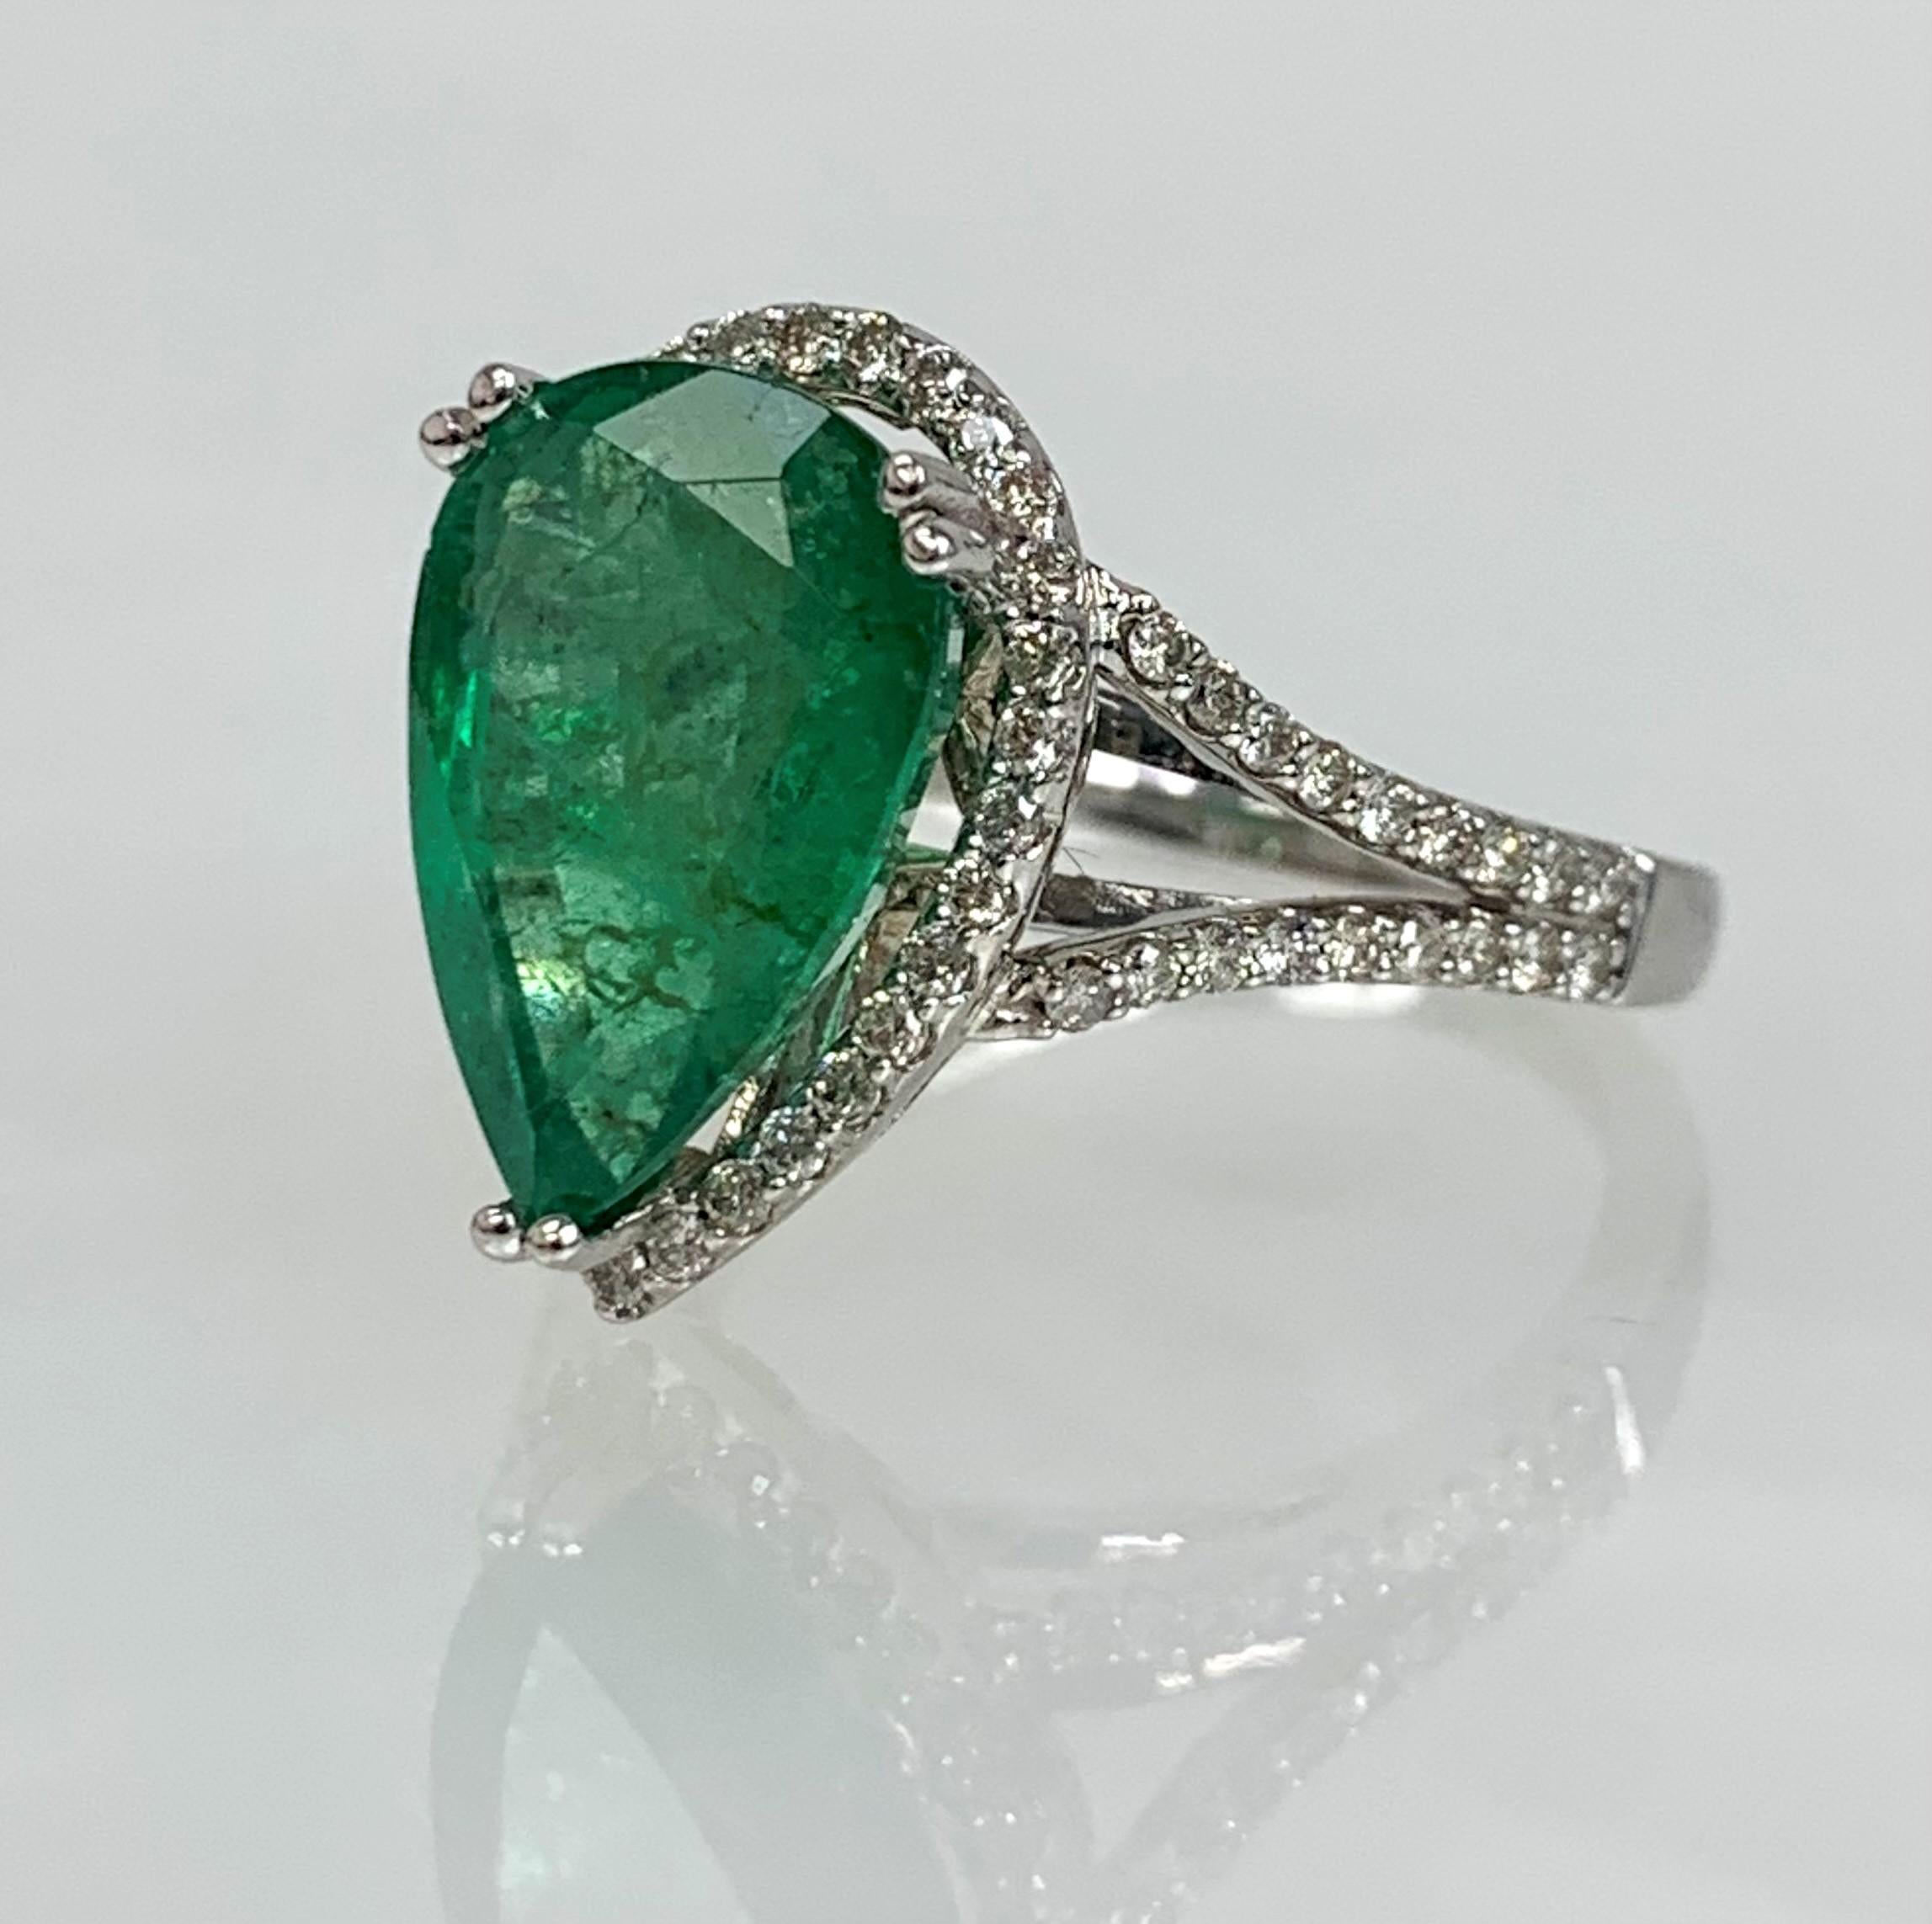 A timeless and noticeable emerald ring featuring a pear shaped center stone weighing 4.36 carats accented by 0.46 carats of white diamonds set in solid 14k white gold with intricate heart shaped detailing beneath the stone.

*Approximate stone